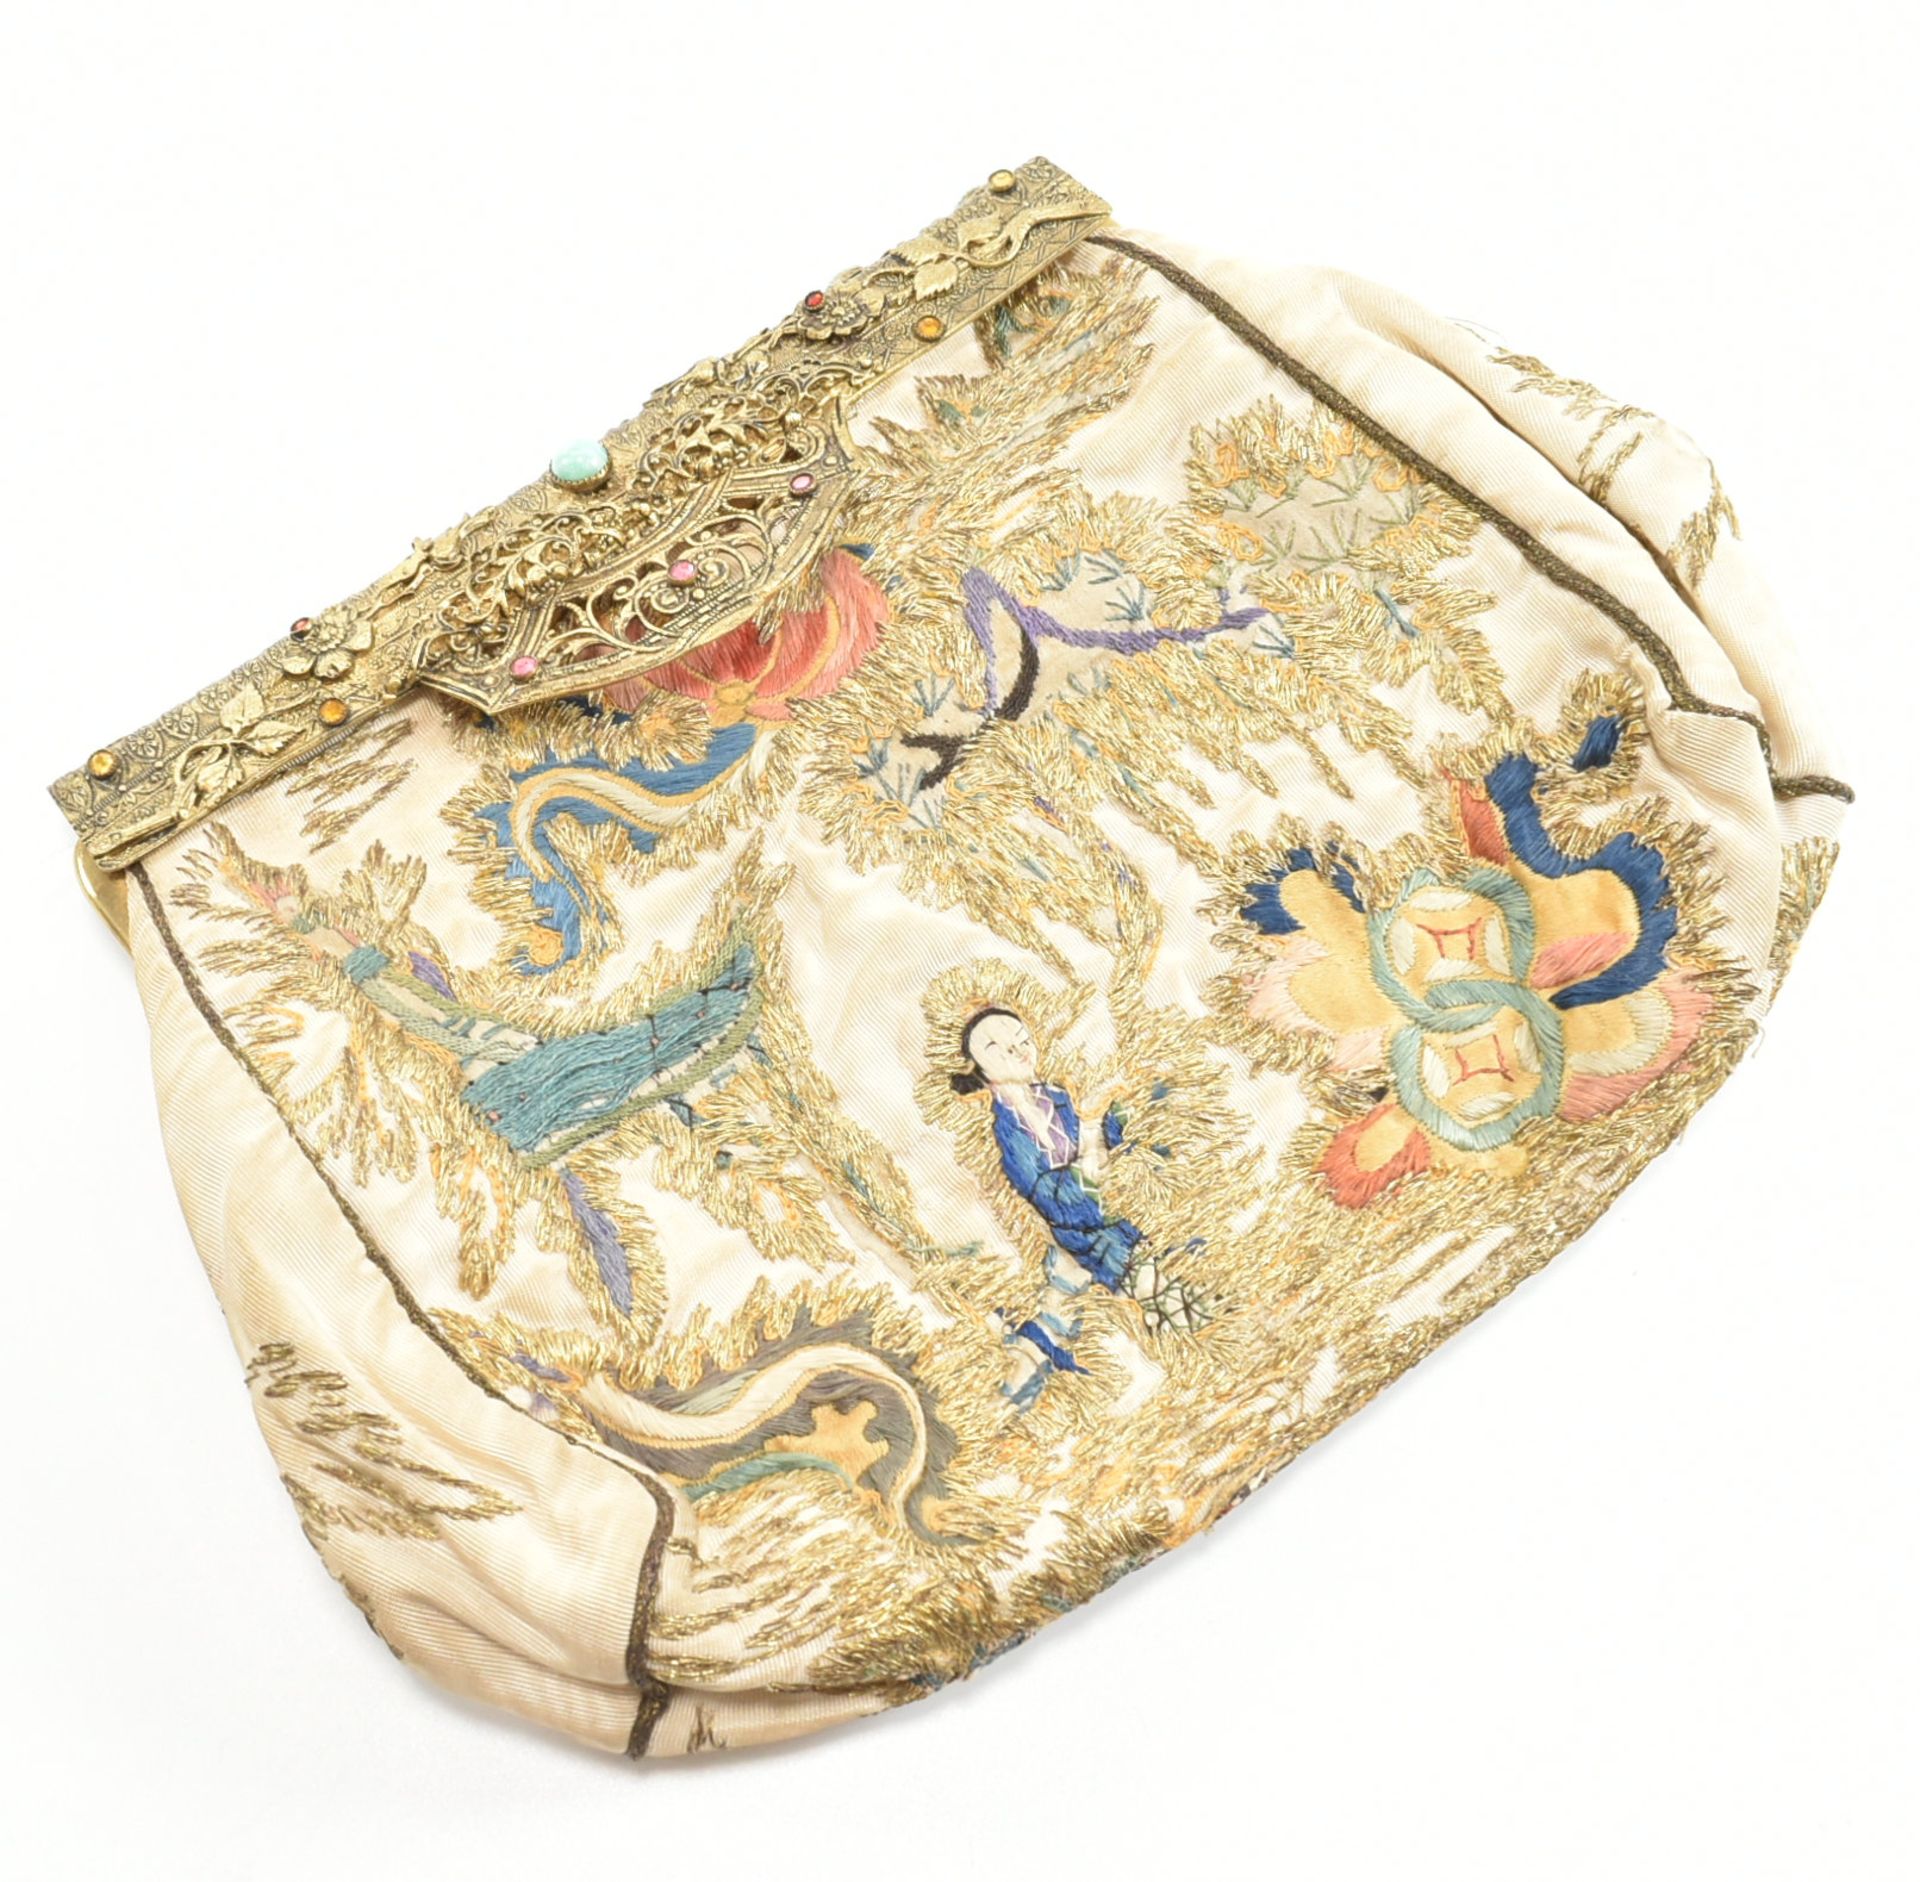 VINTAGE CZECH & CHINOISERIE EMBROIDERED HAND BAG - Image 9 of 10